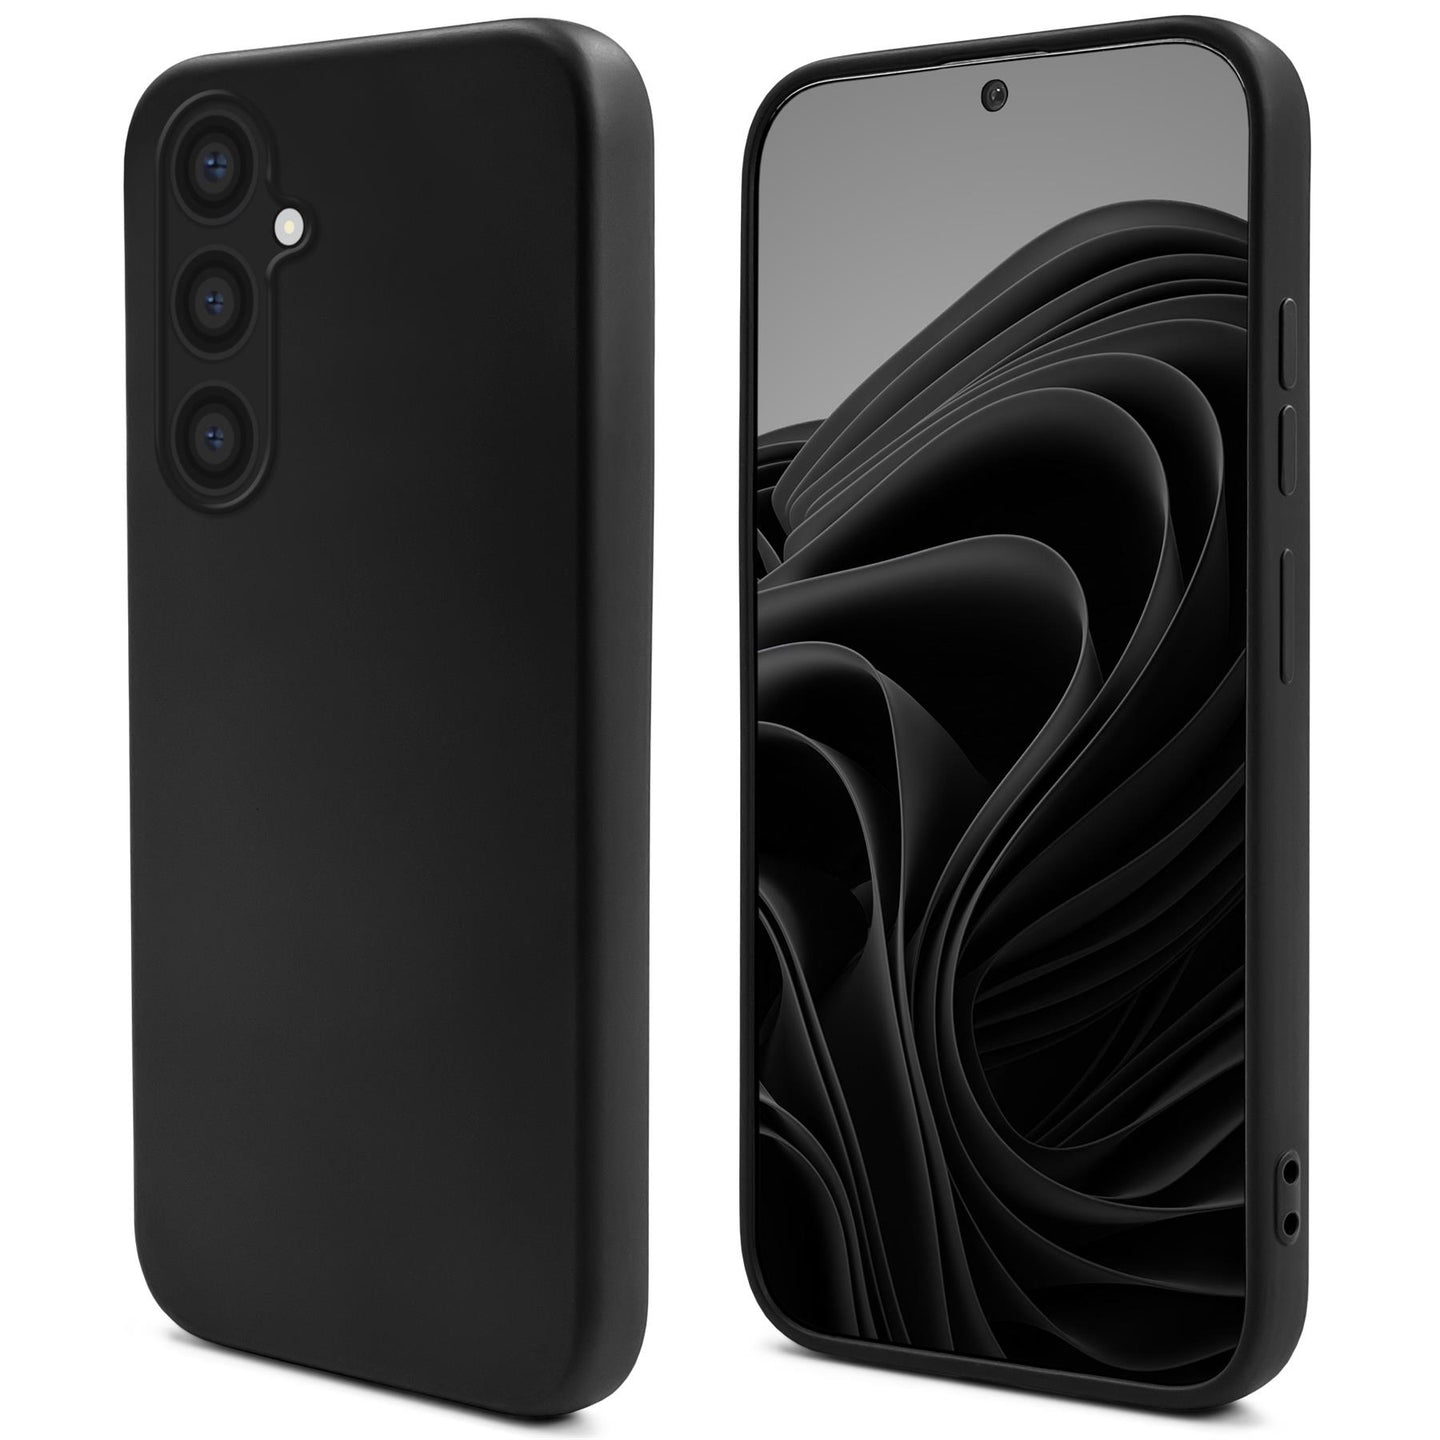 Moozy Lifestyle. Silicone Case for Samsung A54 5G, Black - Liquid Silicone Lightweight Cover with Matte Finish and Soft Microfiber Lining, Premium Silicone Case